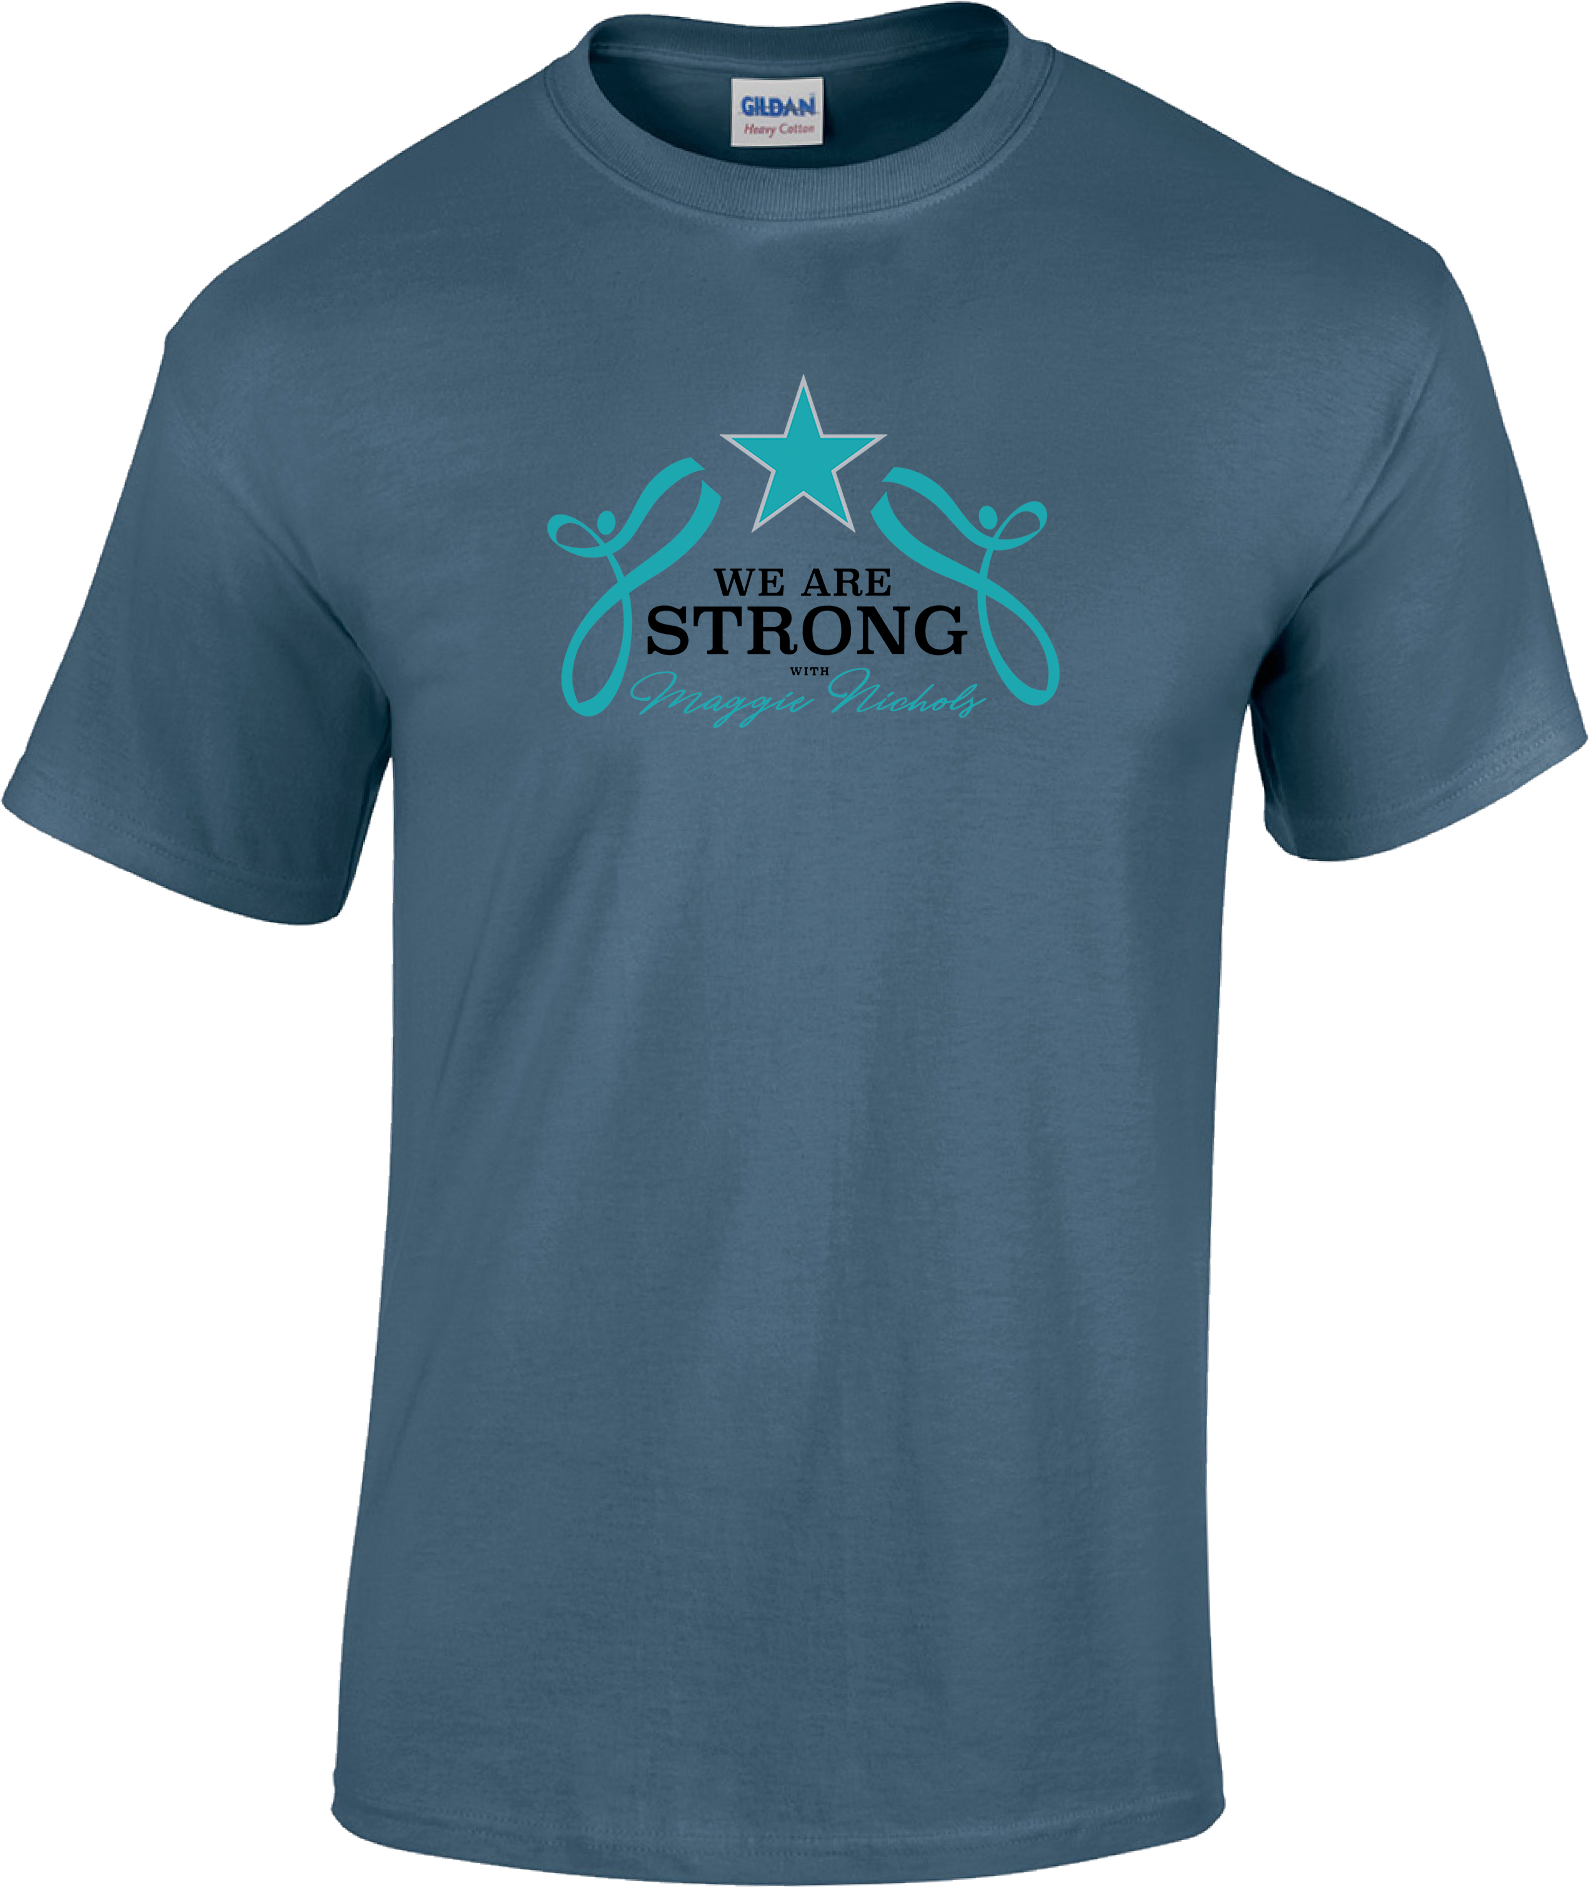 SHORT SLEEVES - 2023 We Are Strong with Maggie Nichols